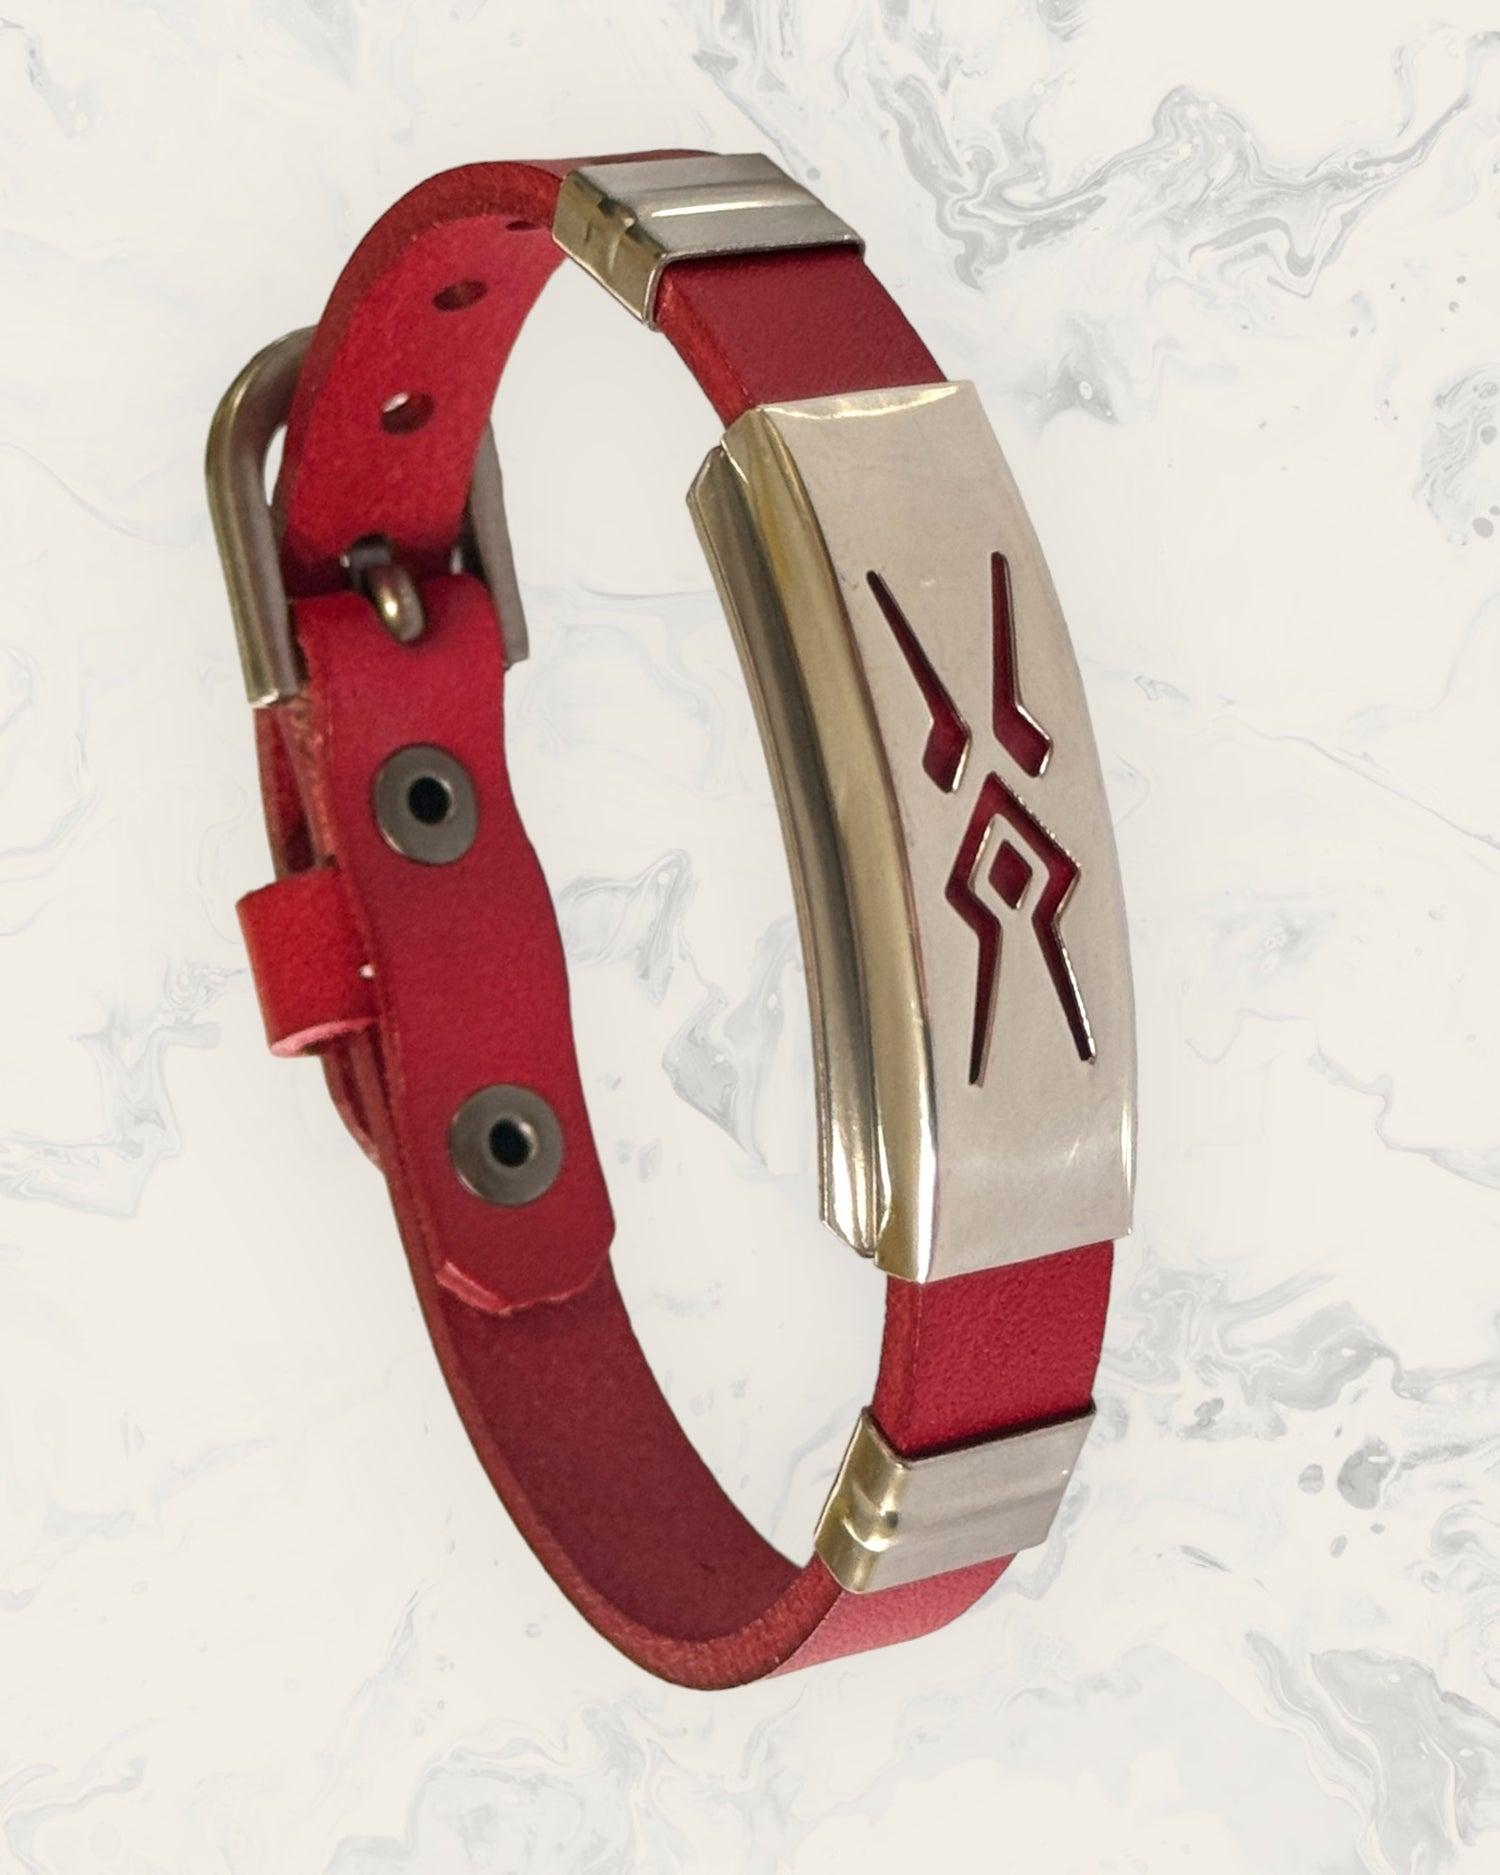 Natural Pain Relief and EMF Protection Bracelet Leather Band Color Red with Aztec design on a silver metal slider